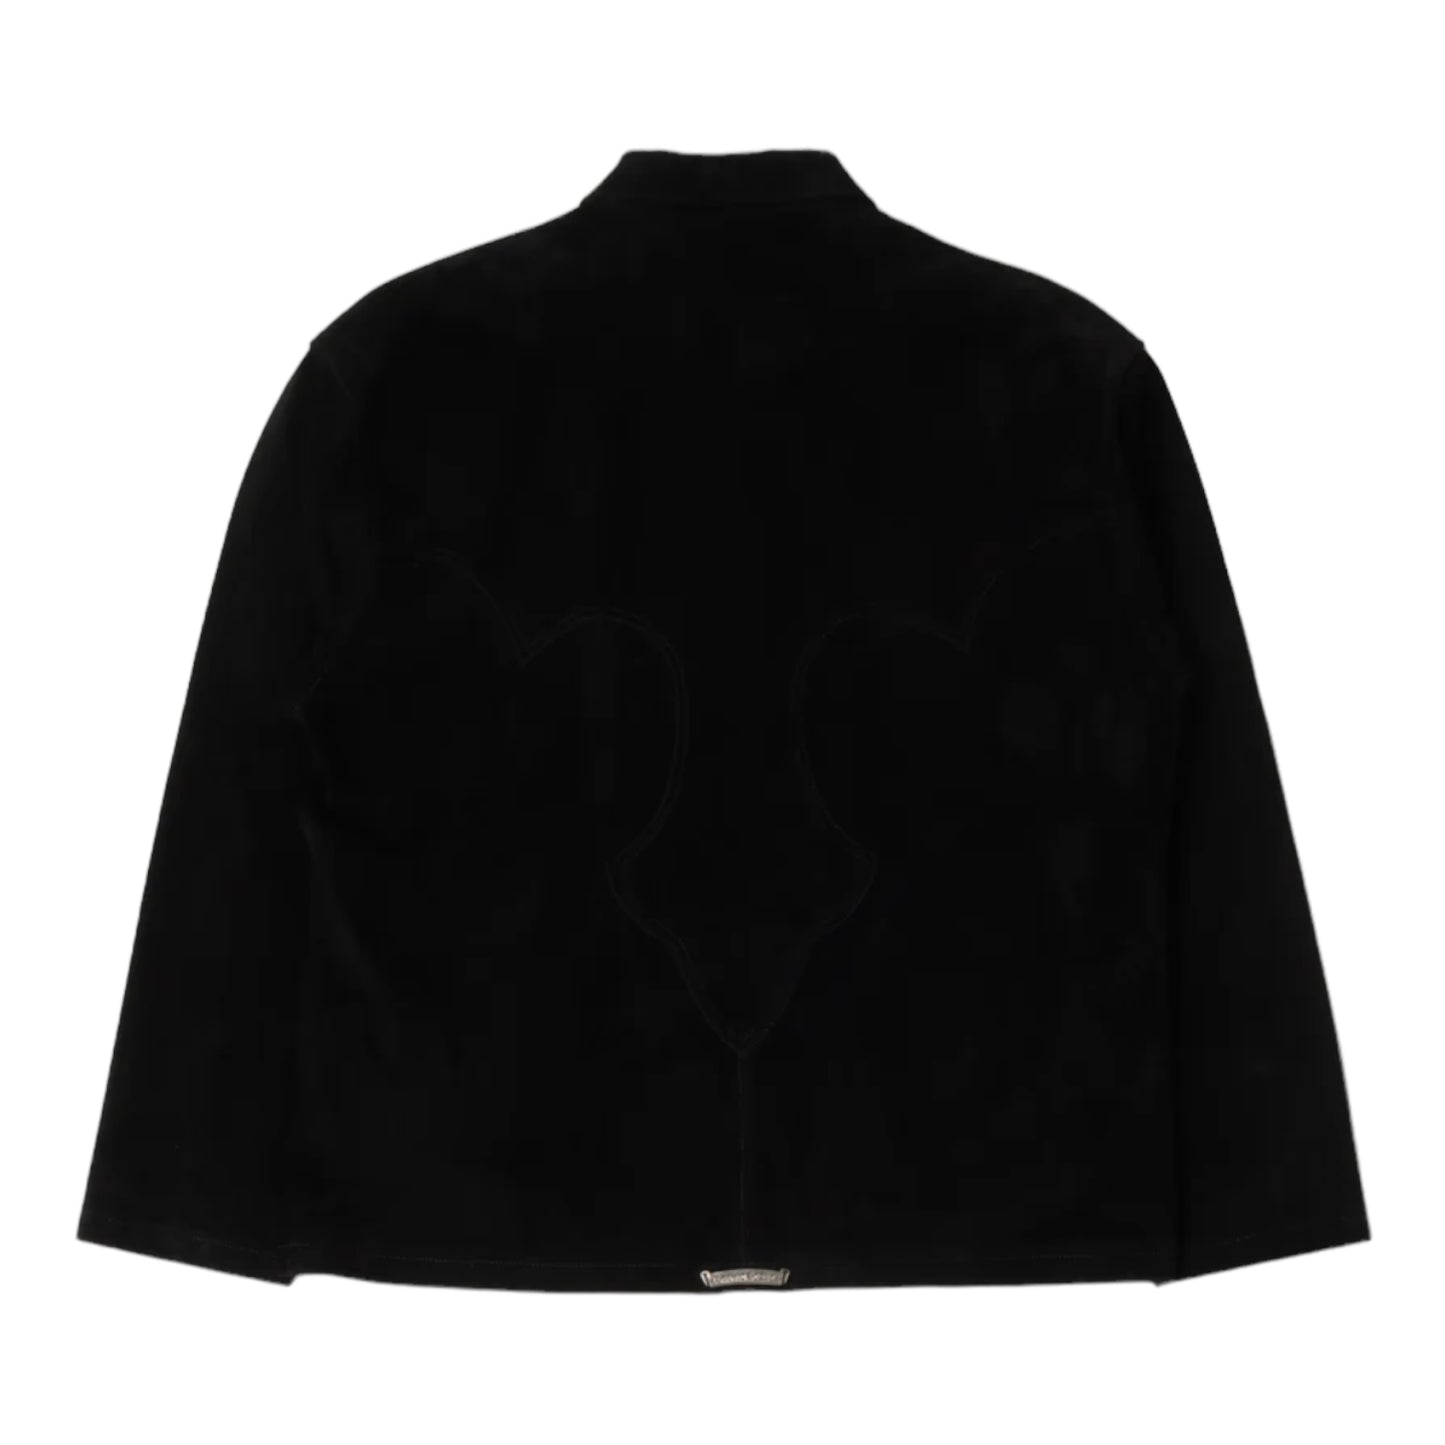 Chrome hearts suede cross leather jacket